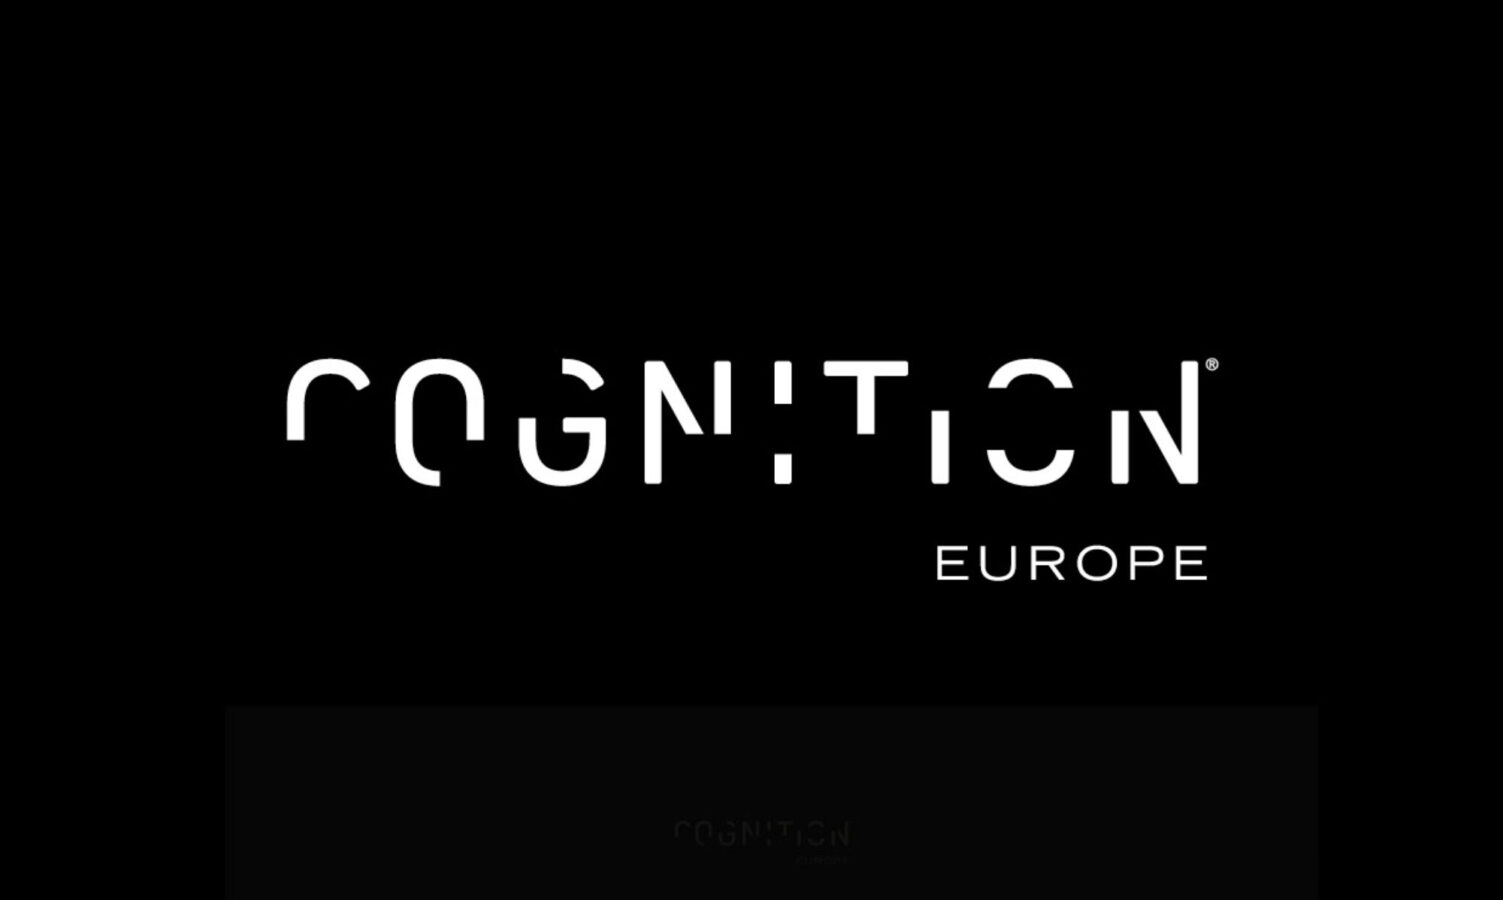 Cognition Europe